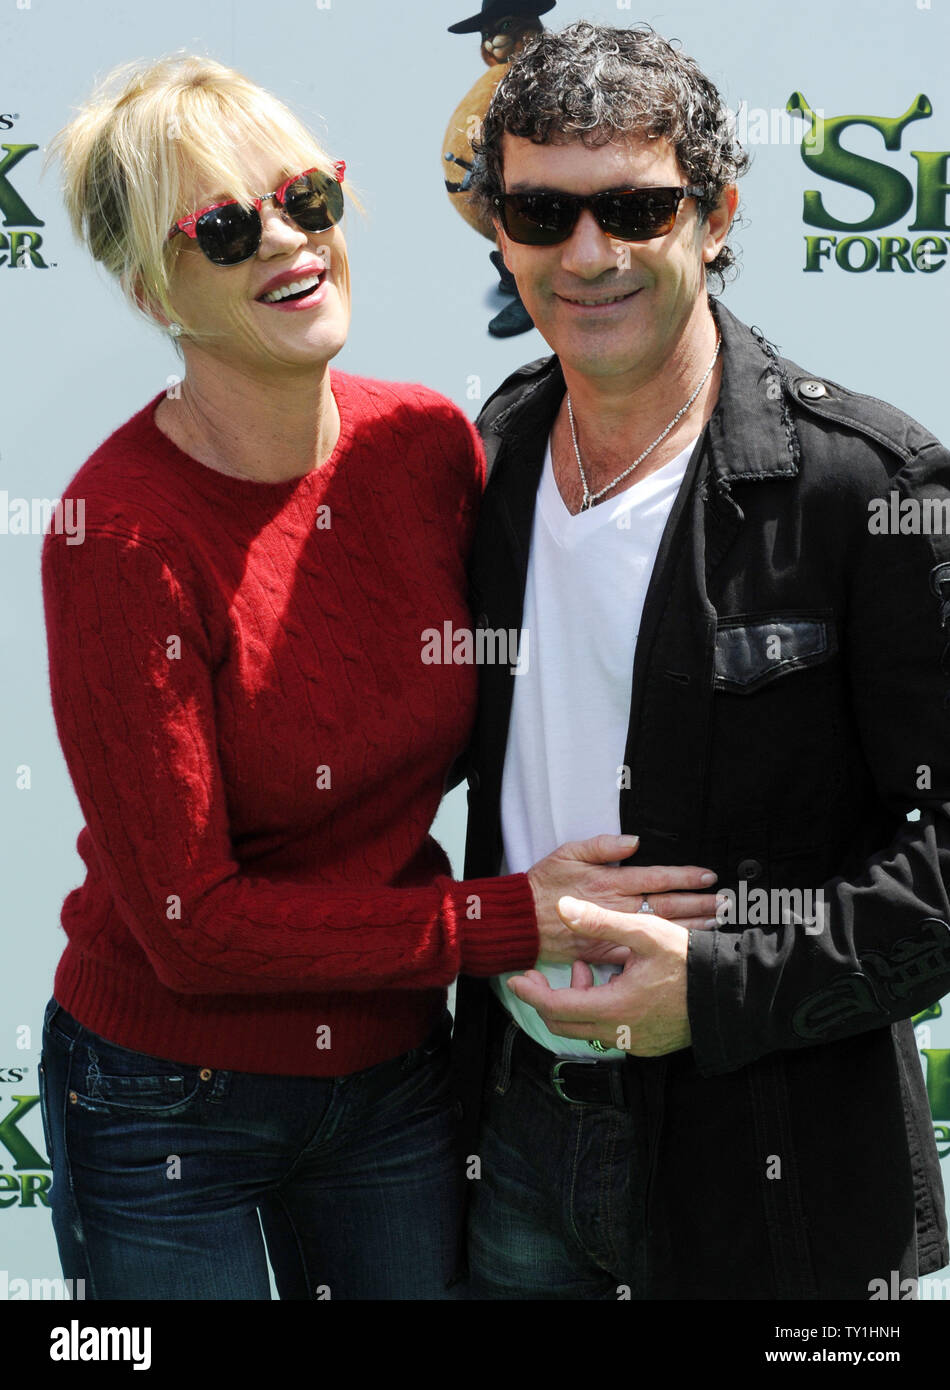 Spanish actor Antonio Banderas (R), the voice of Puss and Boots in the  animated motion picture comedy "Shrek Forever After", attends the premiere  of the film with his wife, actress Melanie Griffith